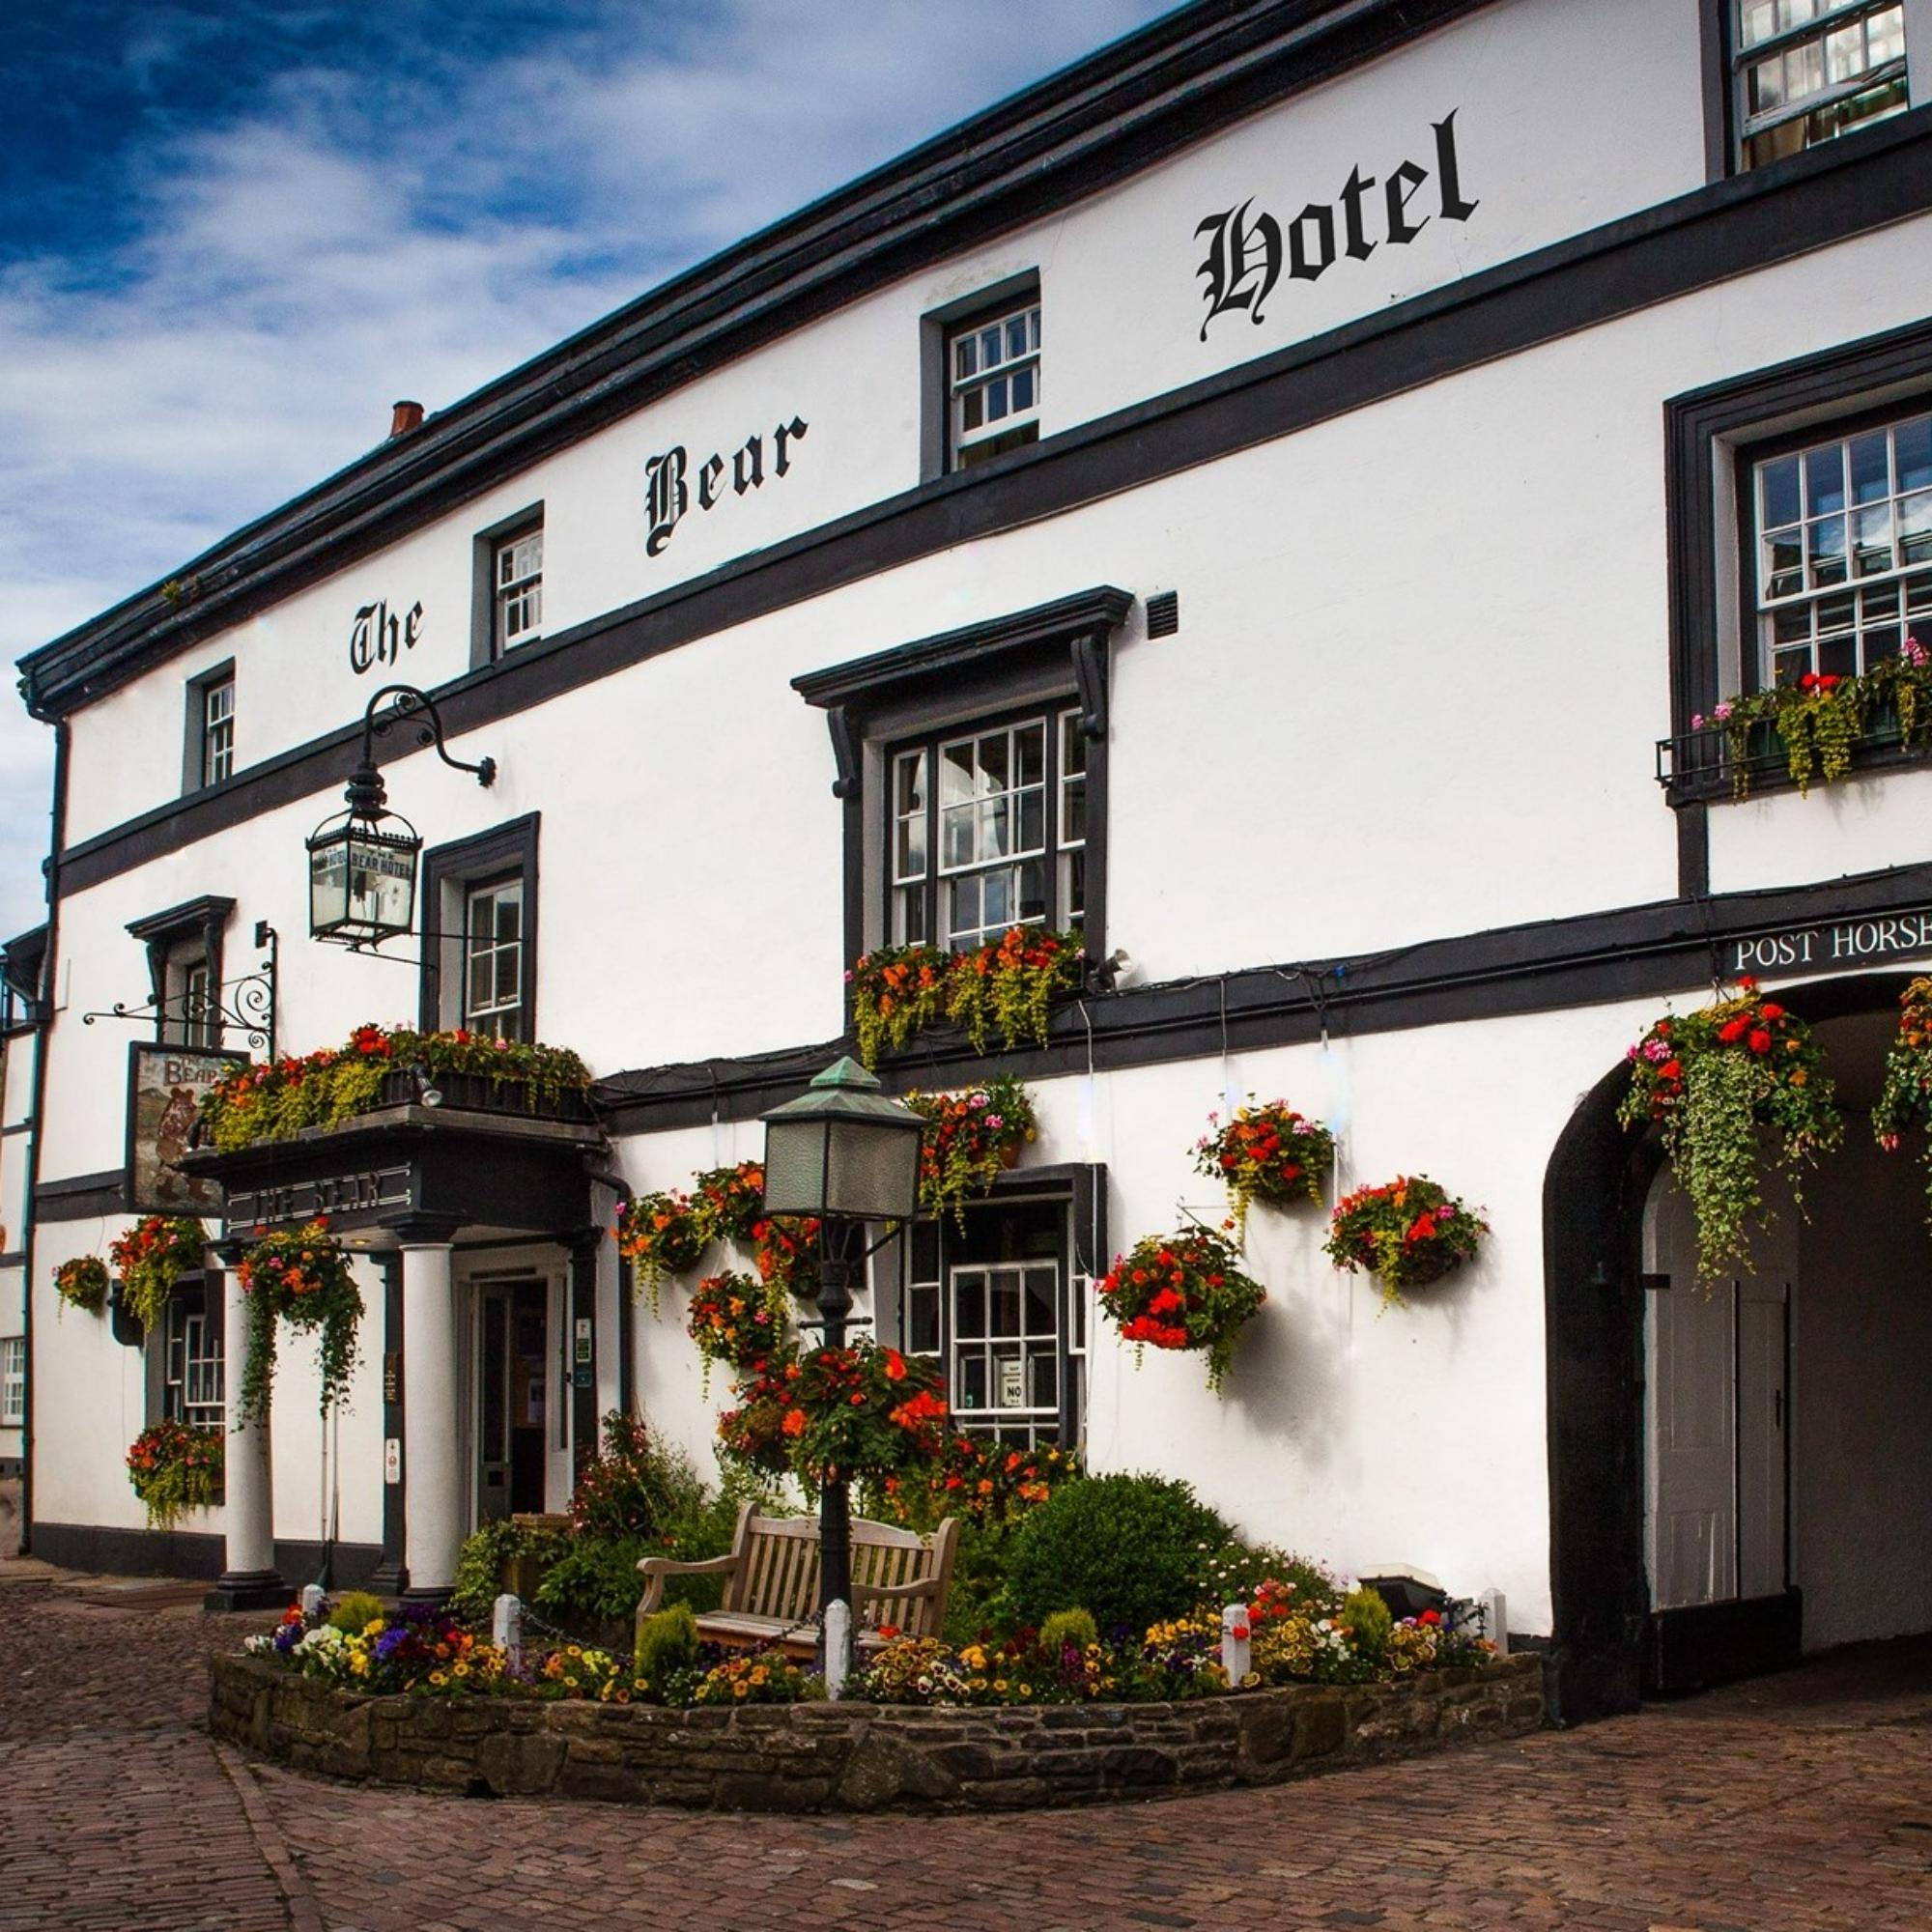 Hotels in Powys holidays at Cool Places